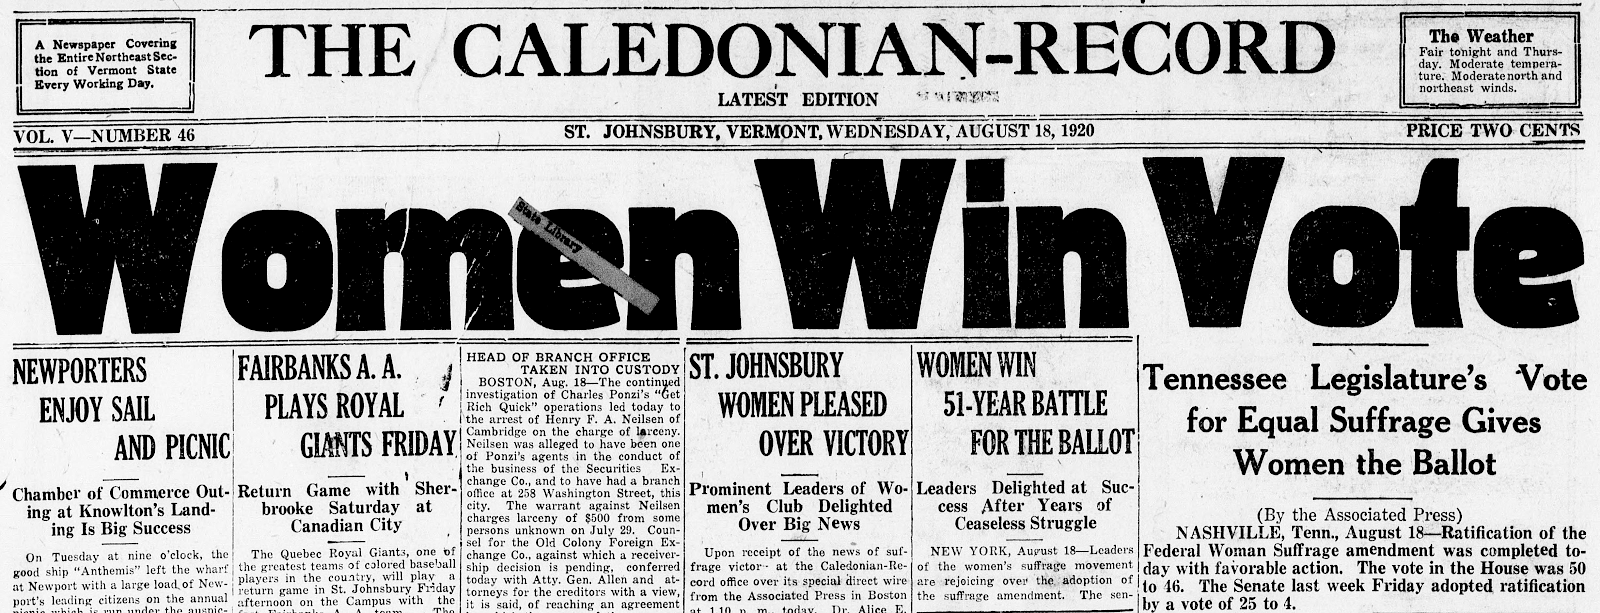 Headline in the Caledonian-Record. St. Johnsbury, Vermont, Aug. 18, 1920. Library of Congress